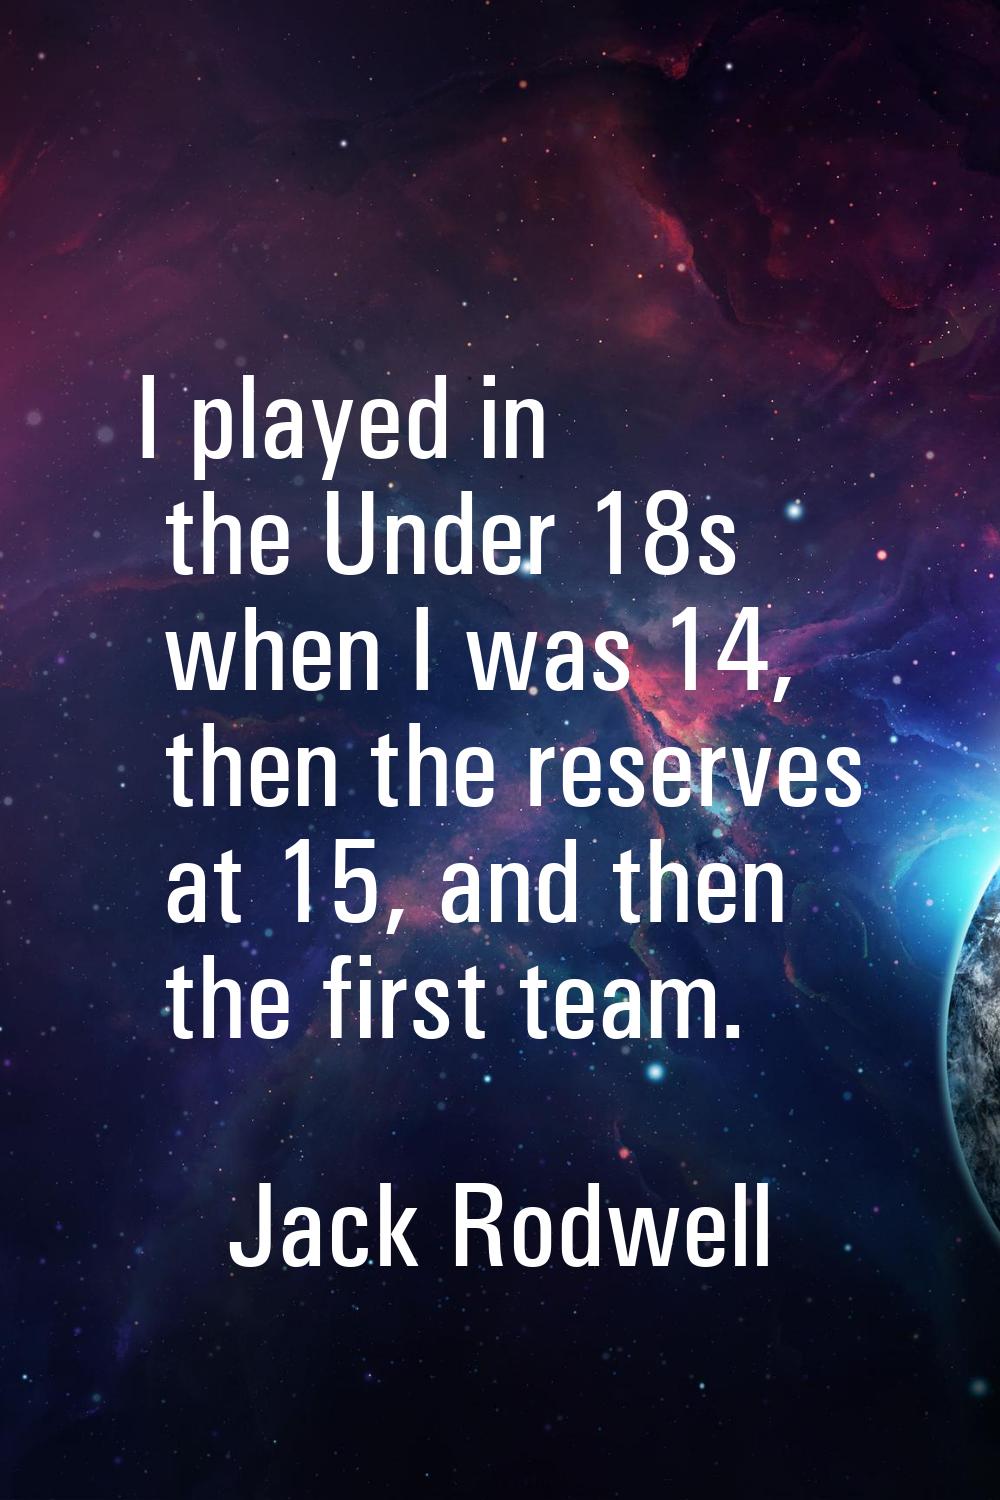 I played in the Under 18s when I was 14, then the reserves at 15, and then the first team.